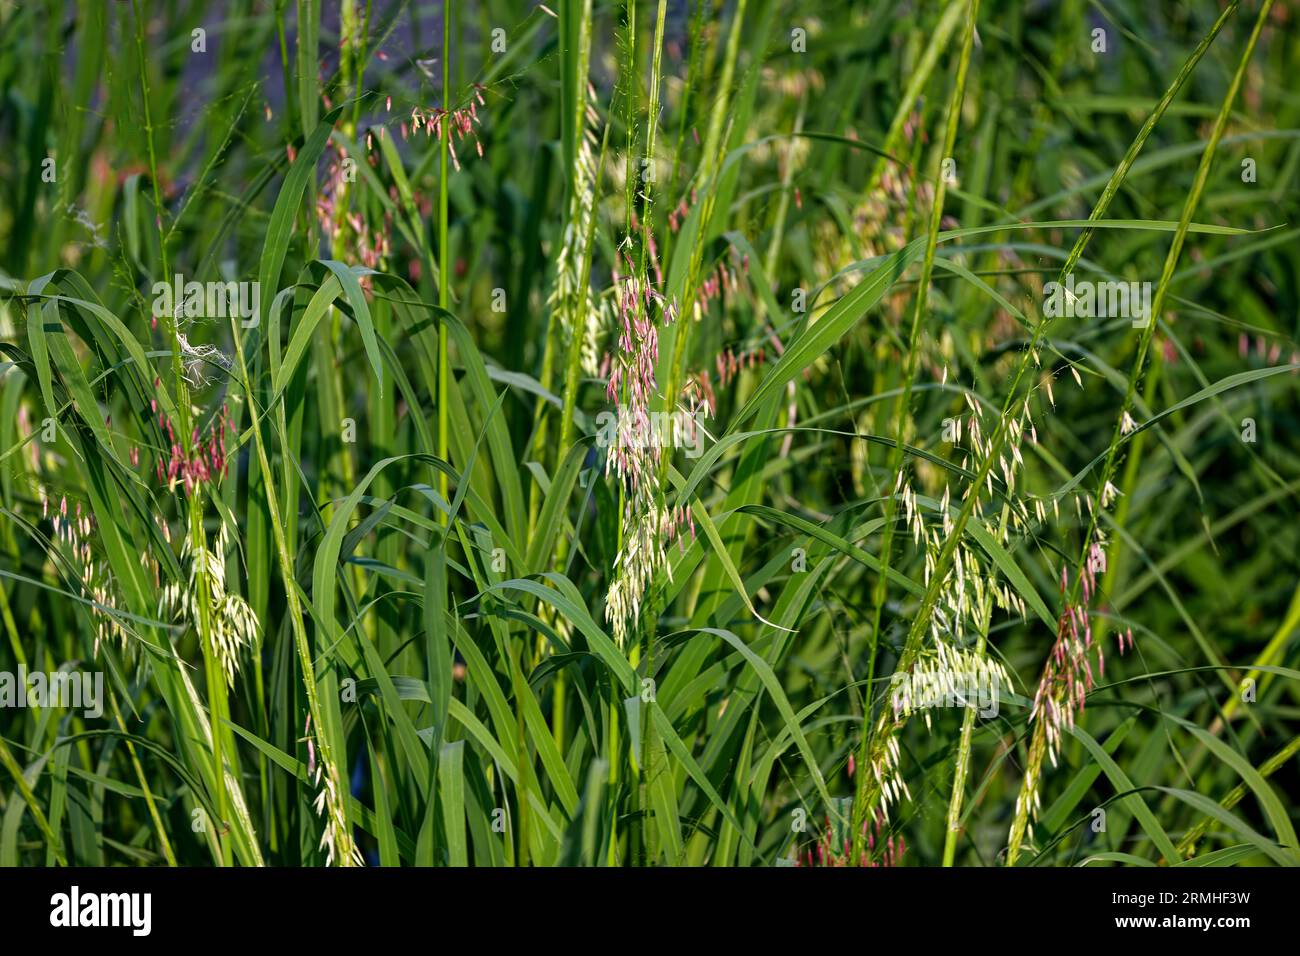 Northern wild rice (Zizania palustris) from Wisconsin. Annual plant native to the Great Lakes region of North America. Stock Photo